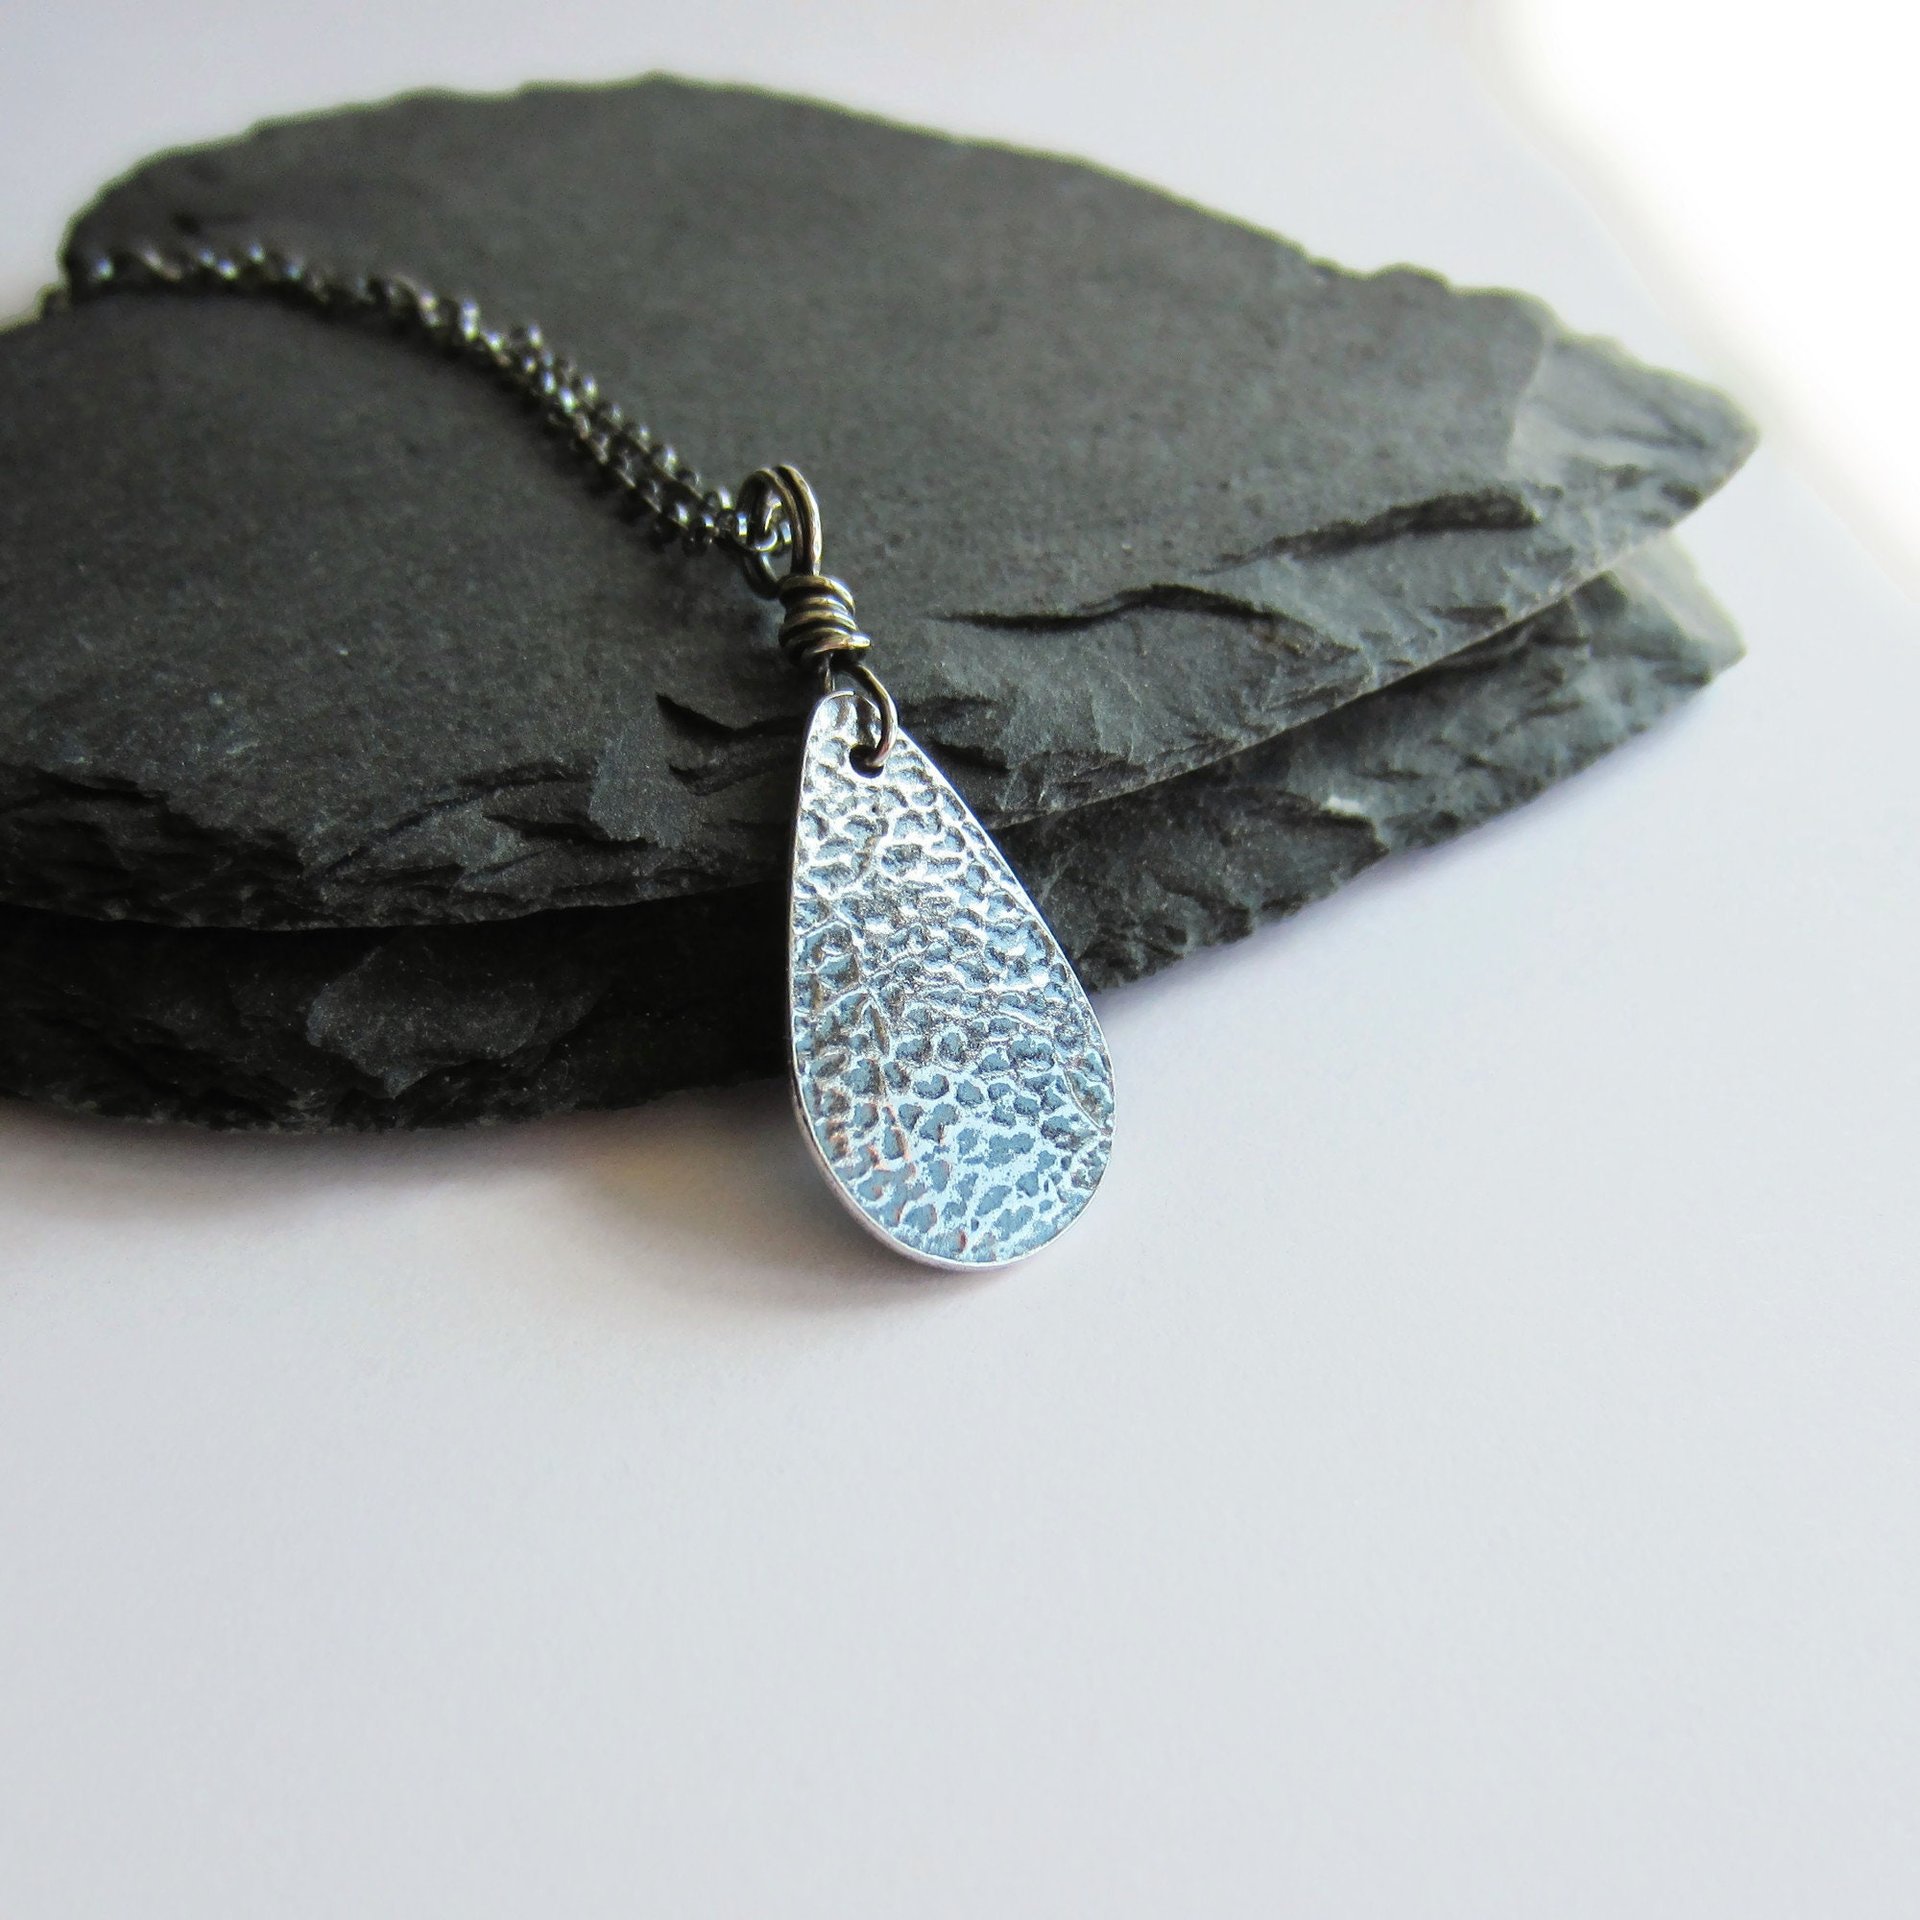 Oxidised Fine Silver Daisy Necklace - April Birth Flower ~ Handmade by The Tiny Tree Frog Jewellery